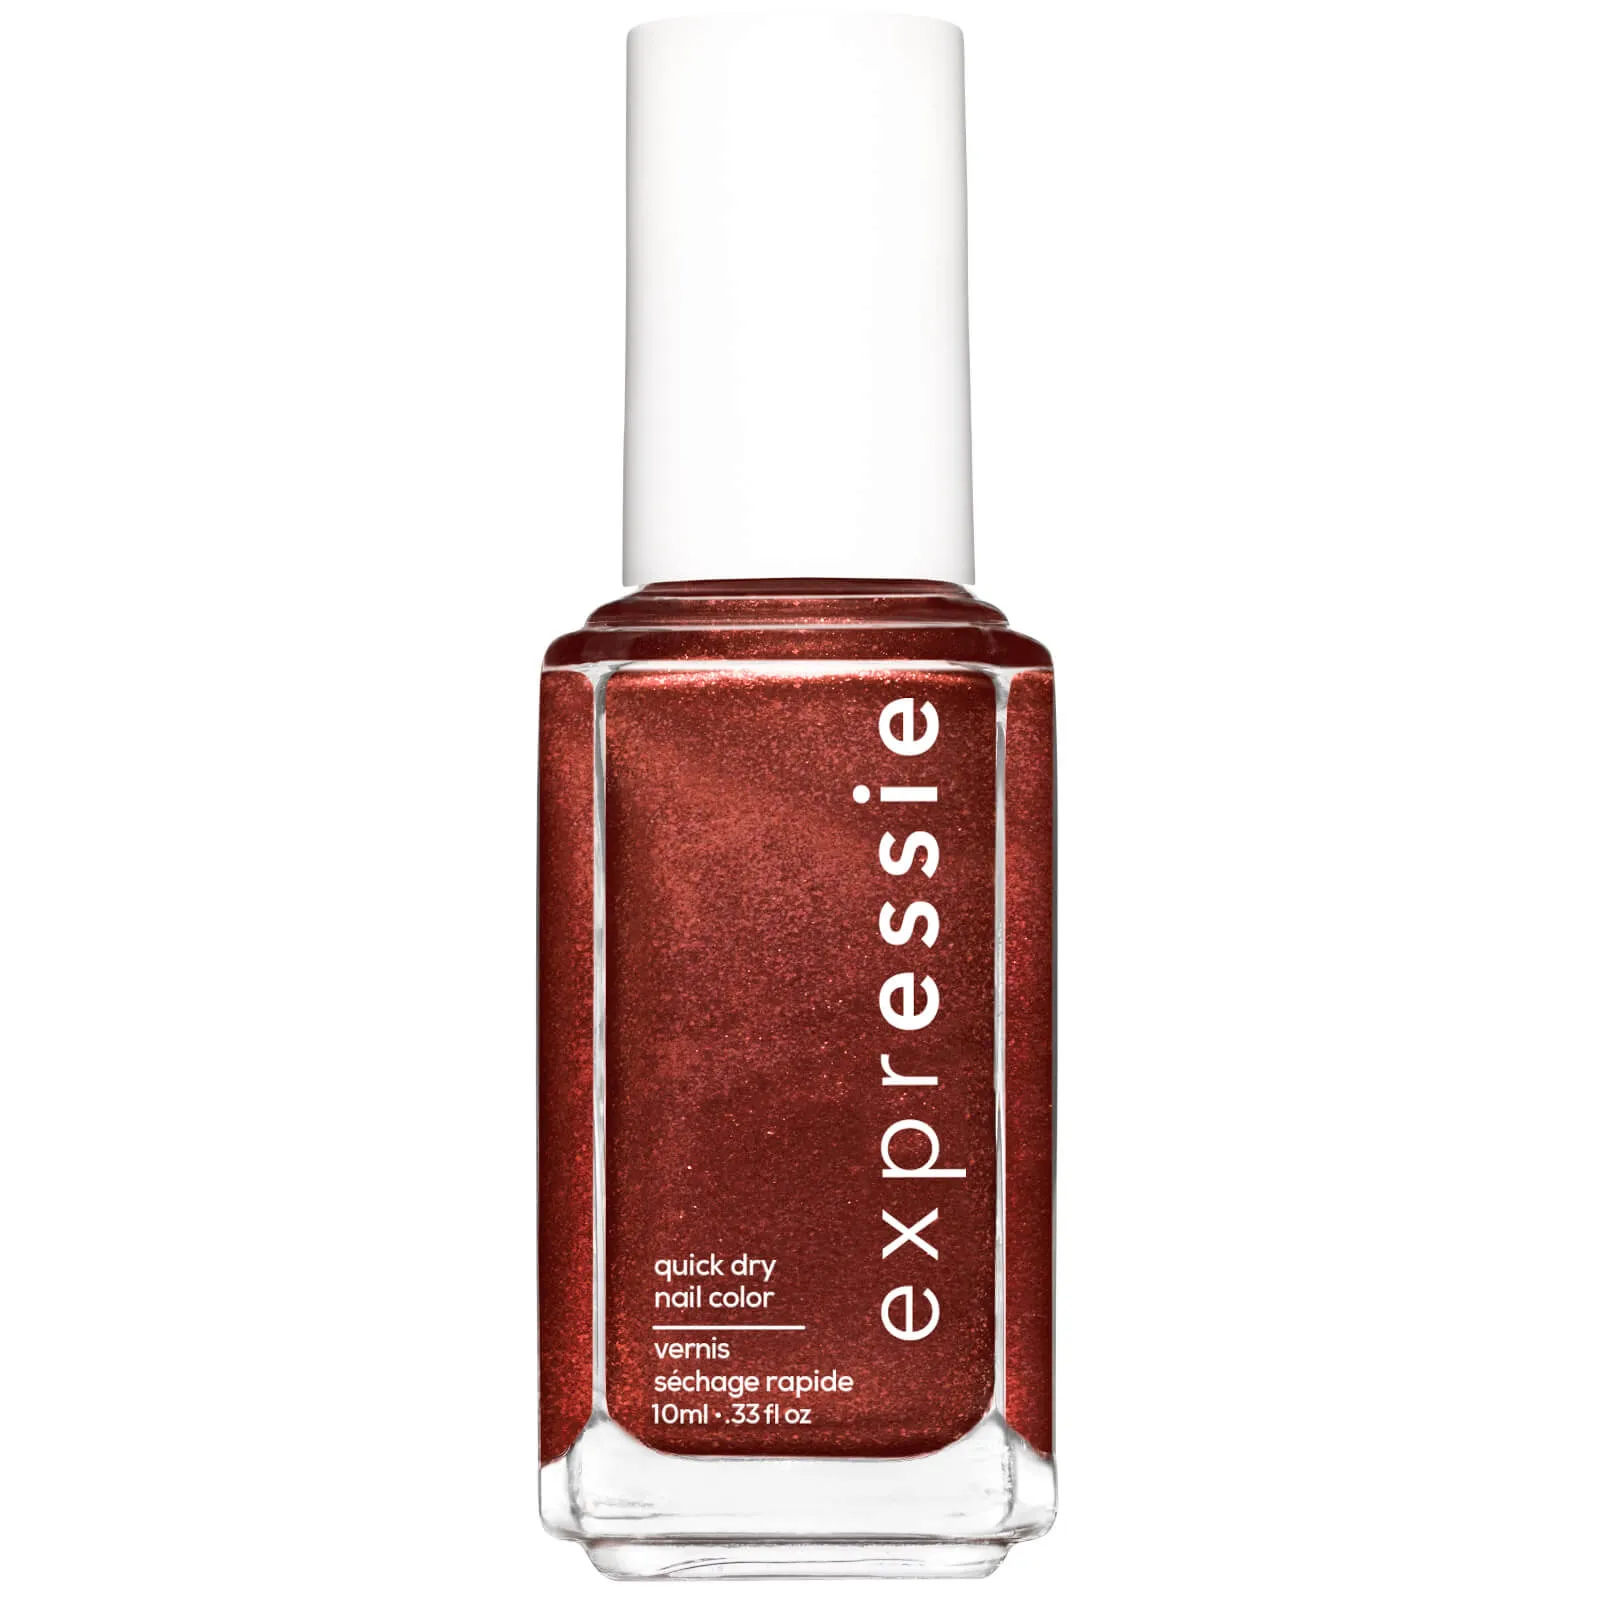  Expr Quick Dry Formula Chip Resistant Nail Polish - 270 Misfit Right in 10ml